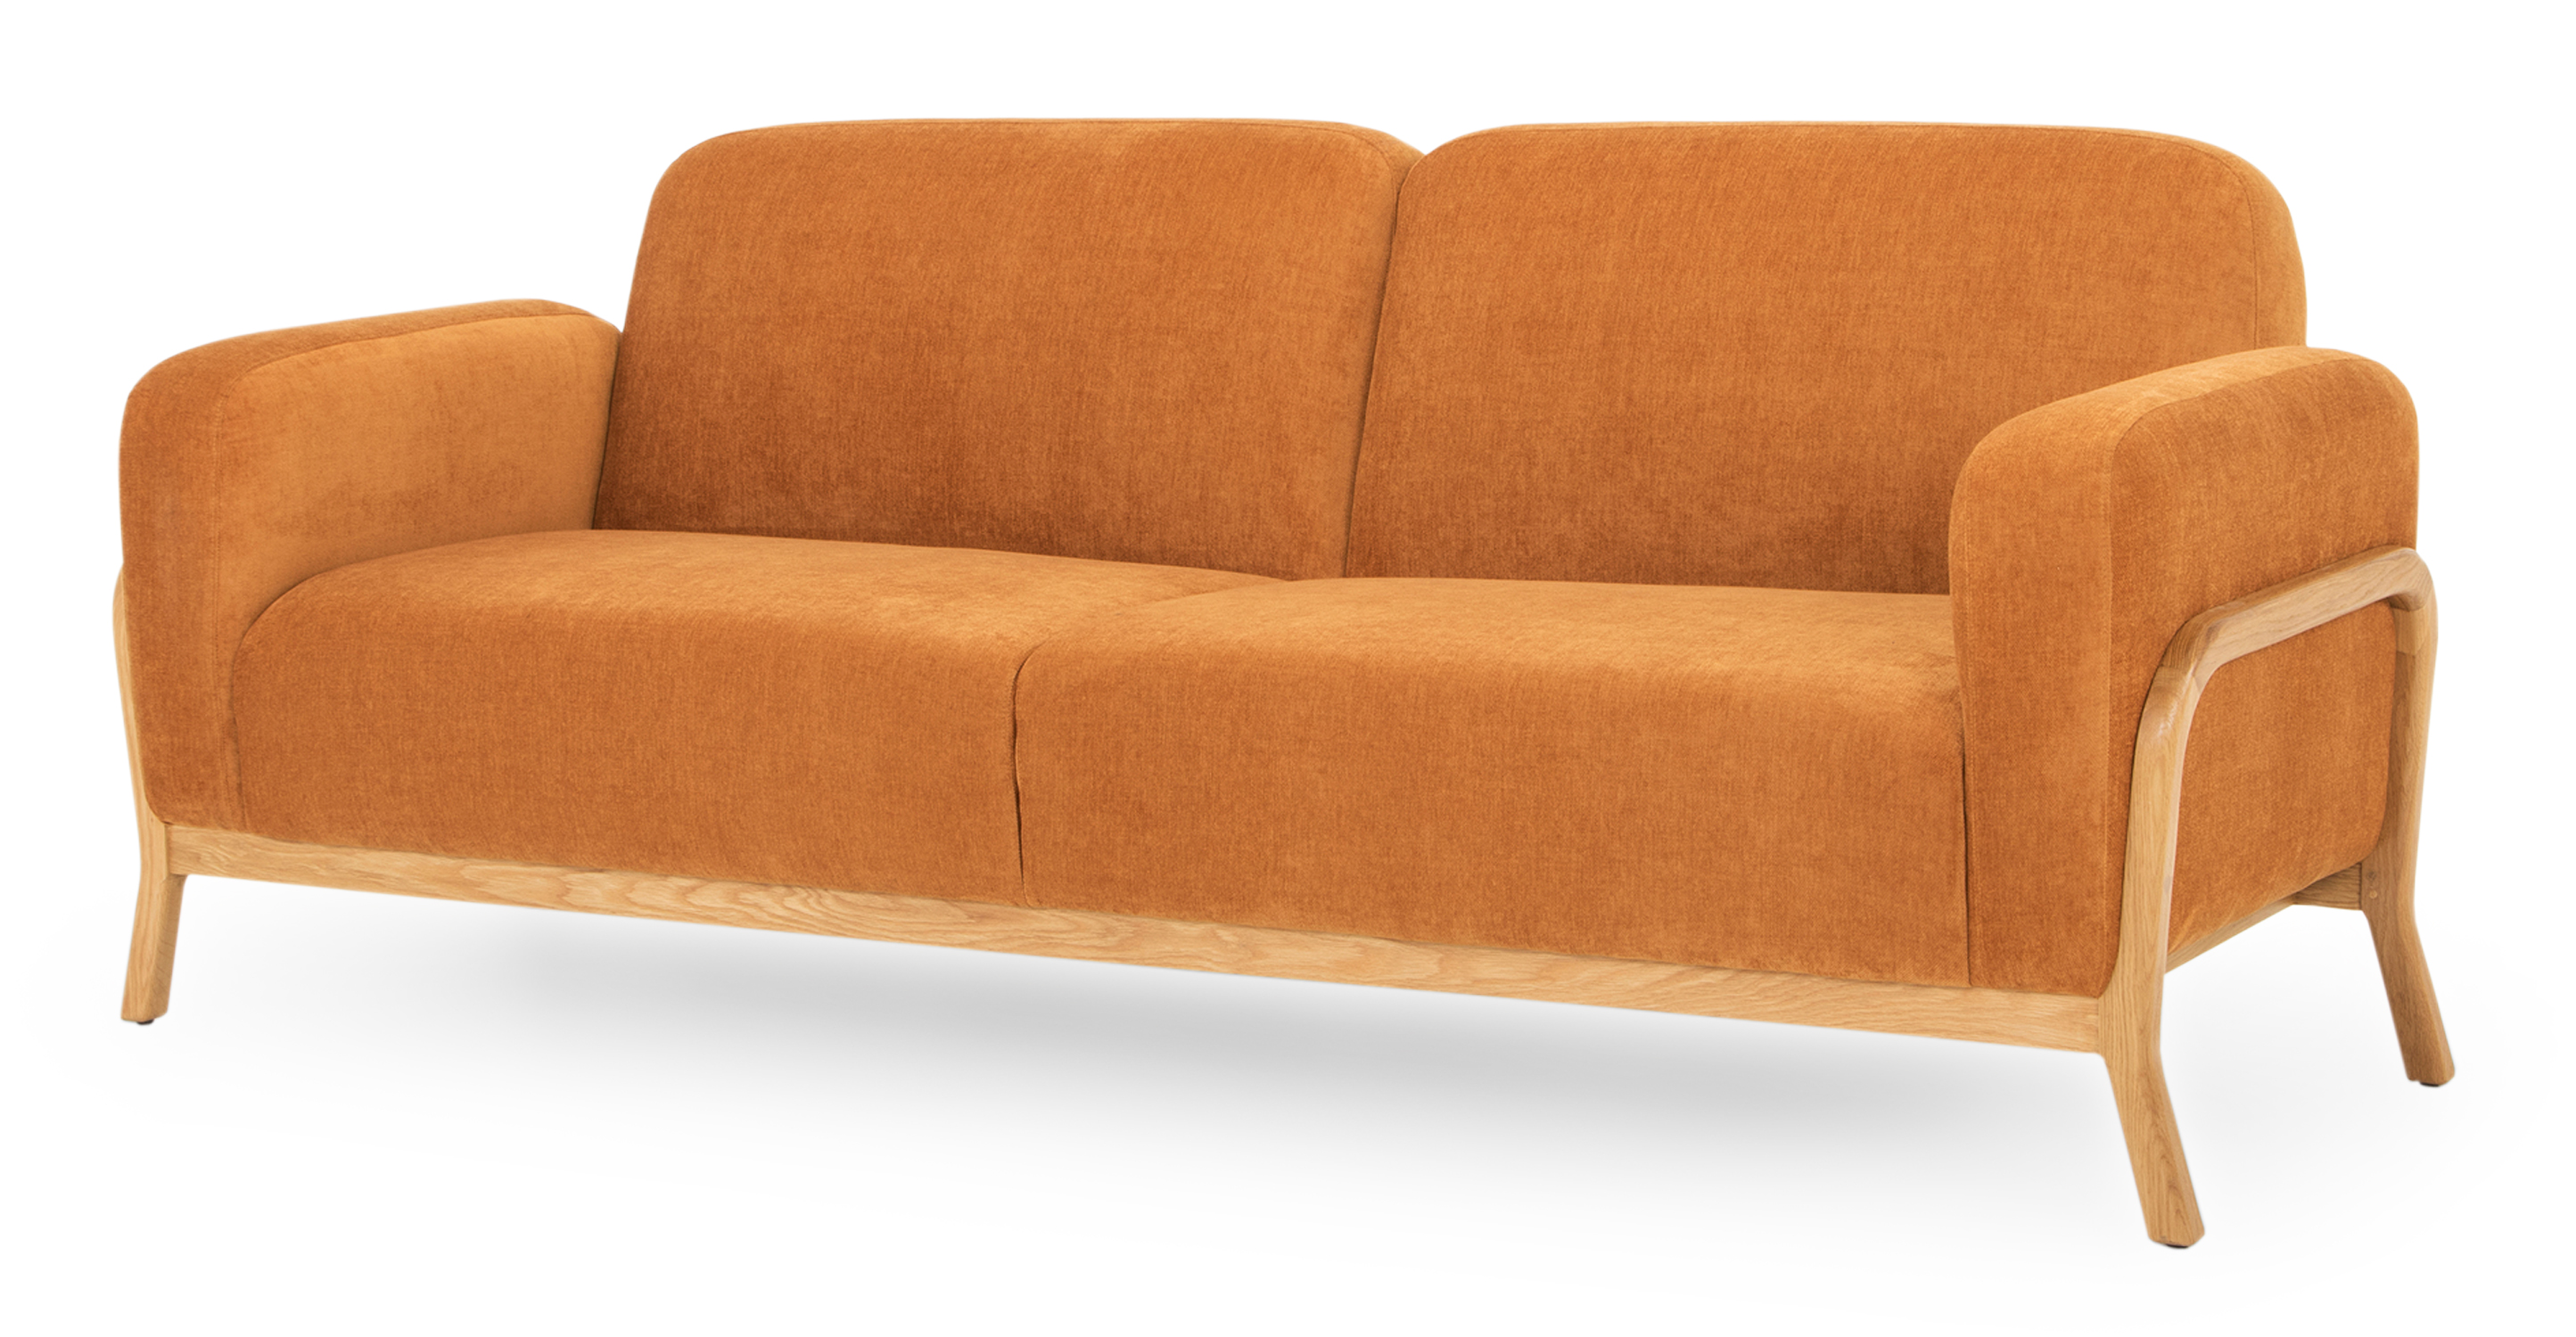 Cabbie is a Retro modern sofa in orange fabric. Features intricately curved solid Oak full wooden frame and legs. The sofa is fully upholstered , comes with fixed back and seat cushions and rounded corners, which mirrors its natural wood accents. (Front)